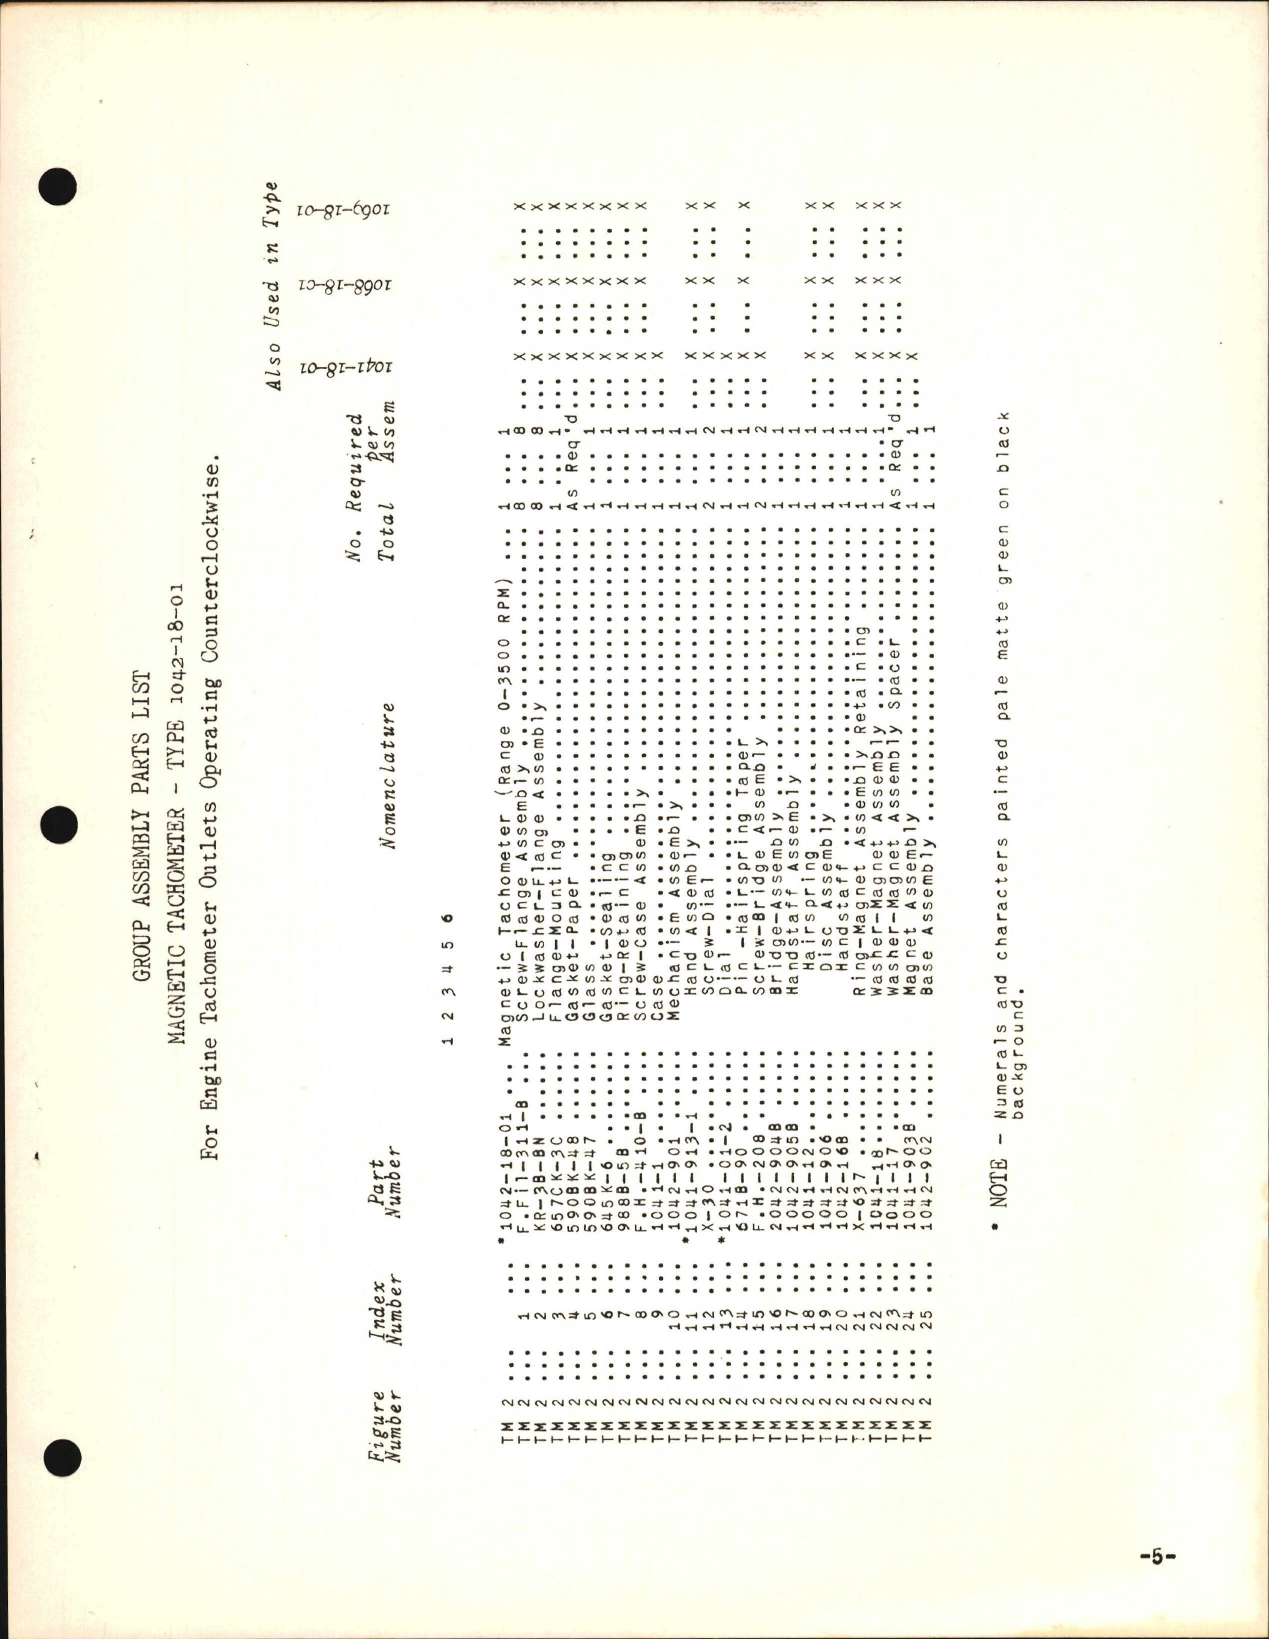 Sample page 5 from AirCorps Library document: Parts Catalog for Kollsman Magnetic Tachometers and Tachologs